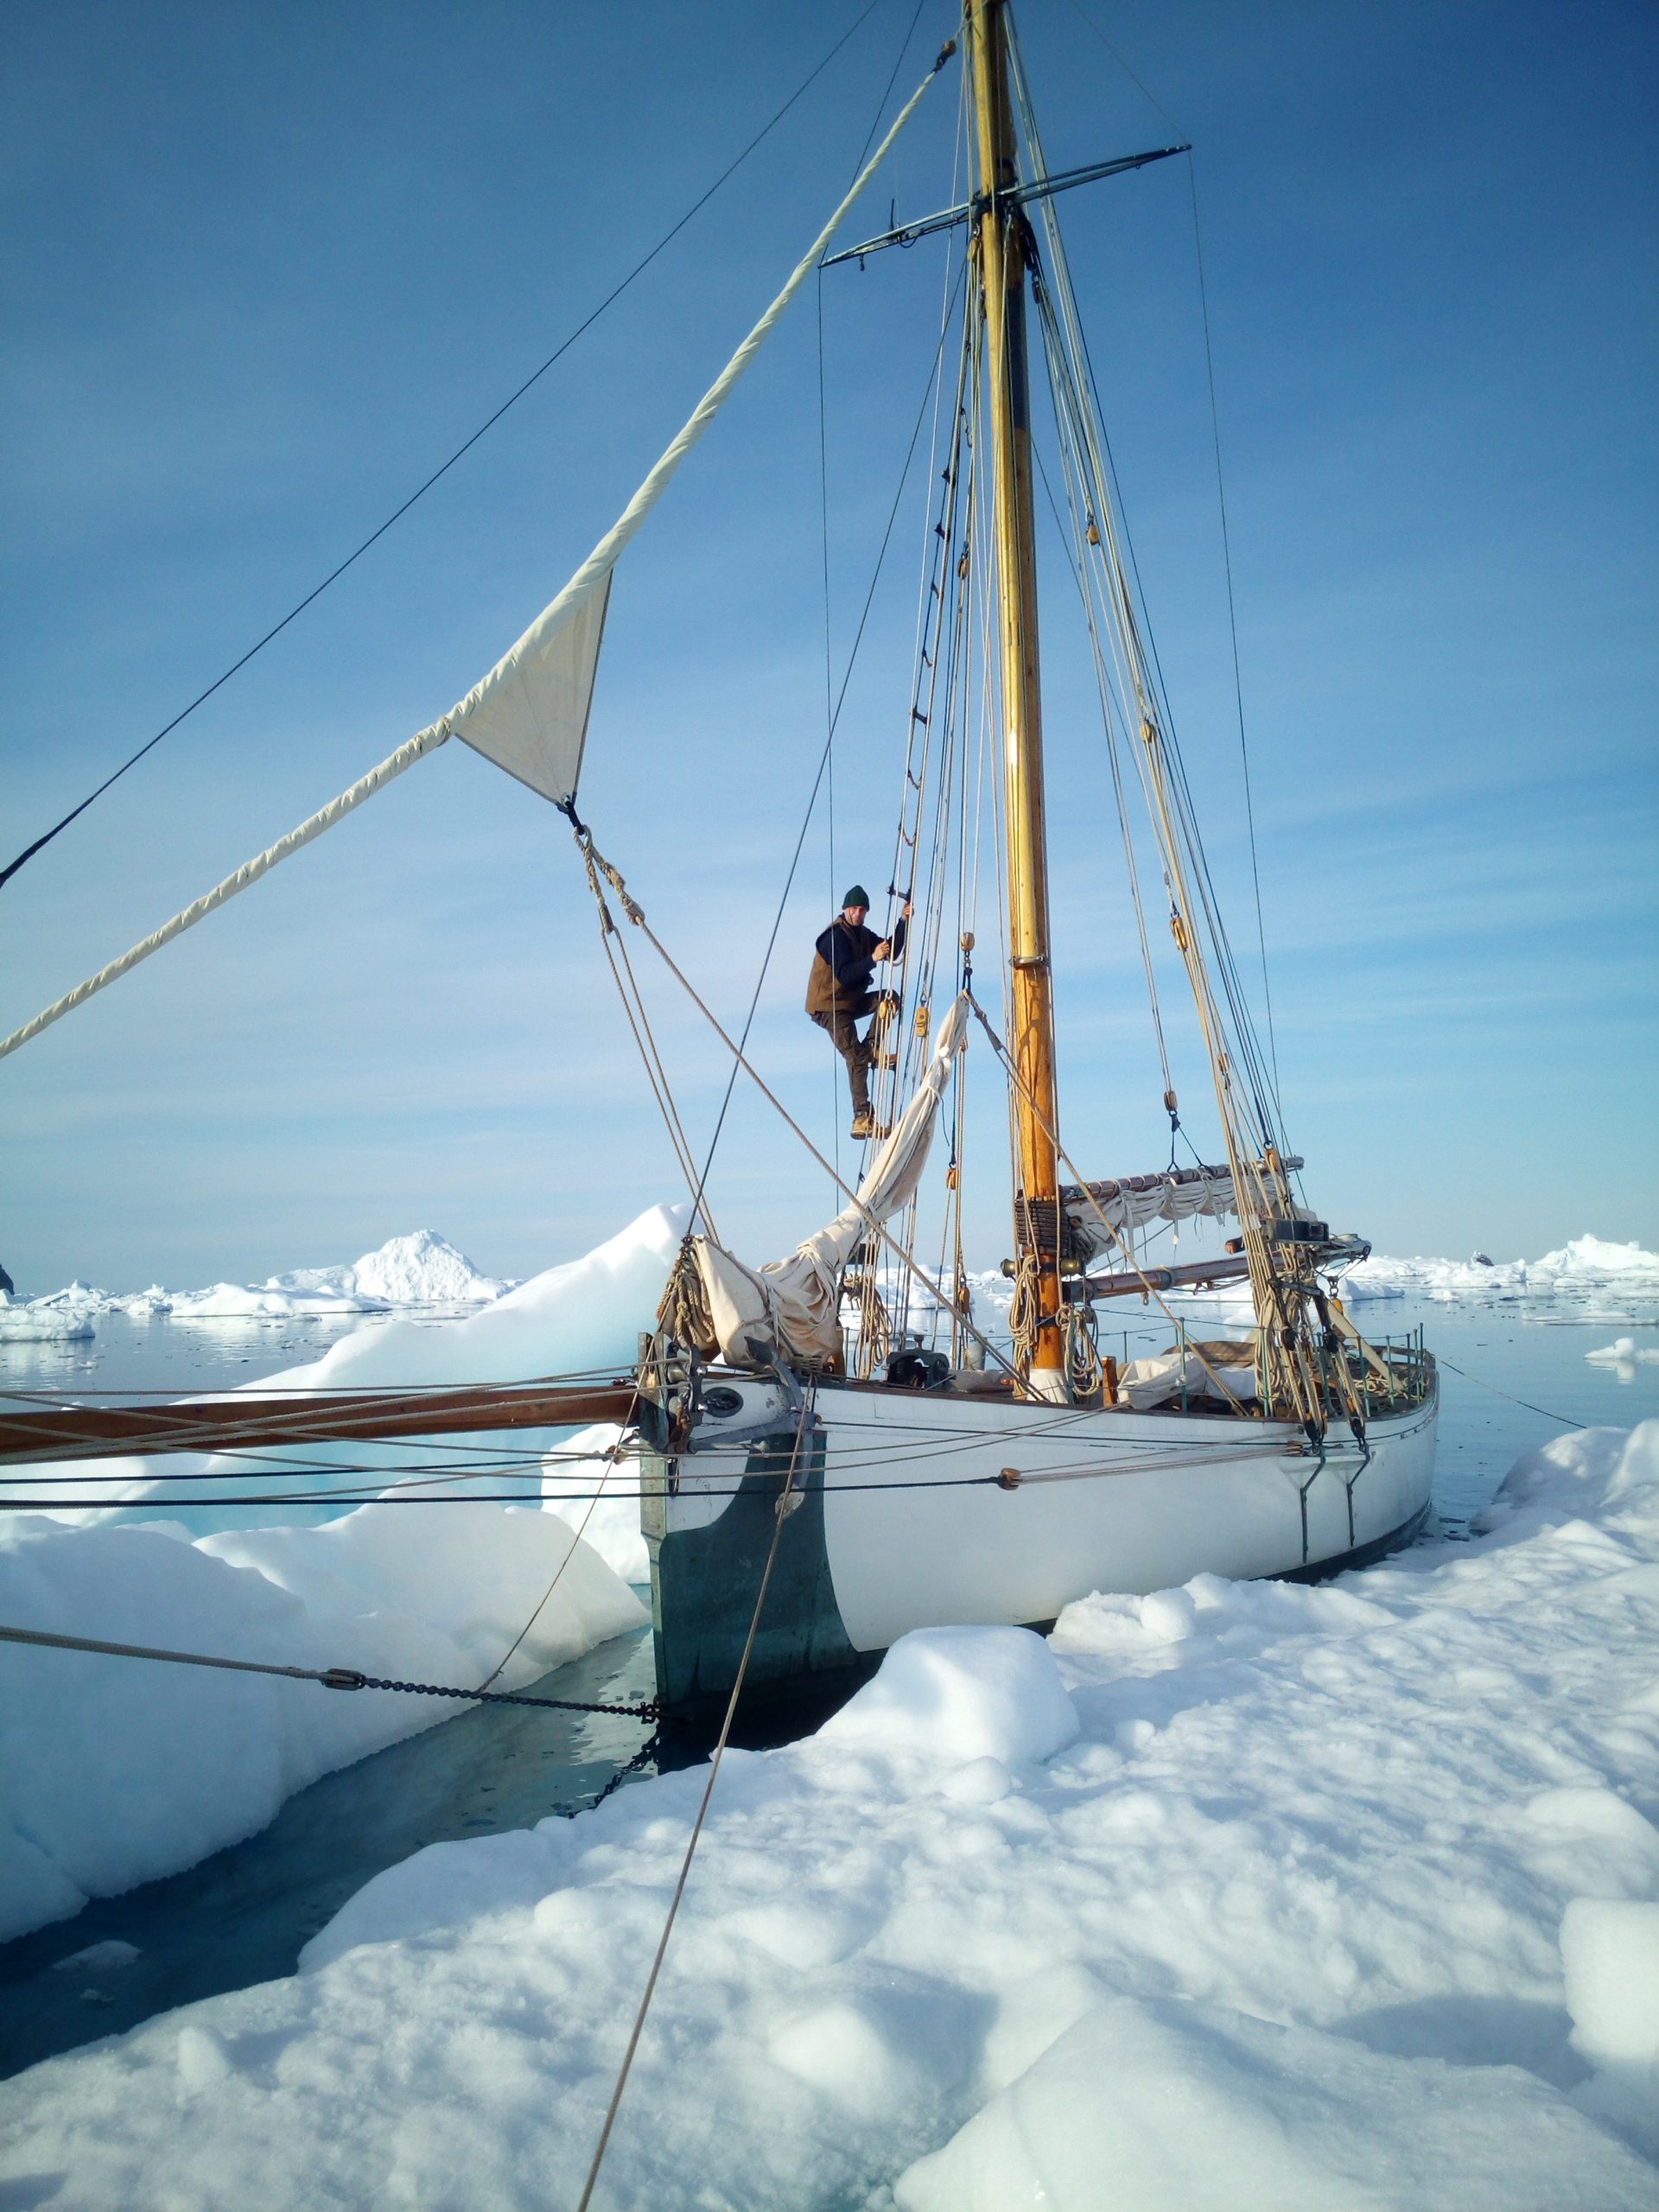 Preparations for the North West Passage – One week to go!